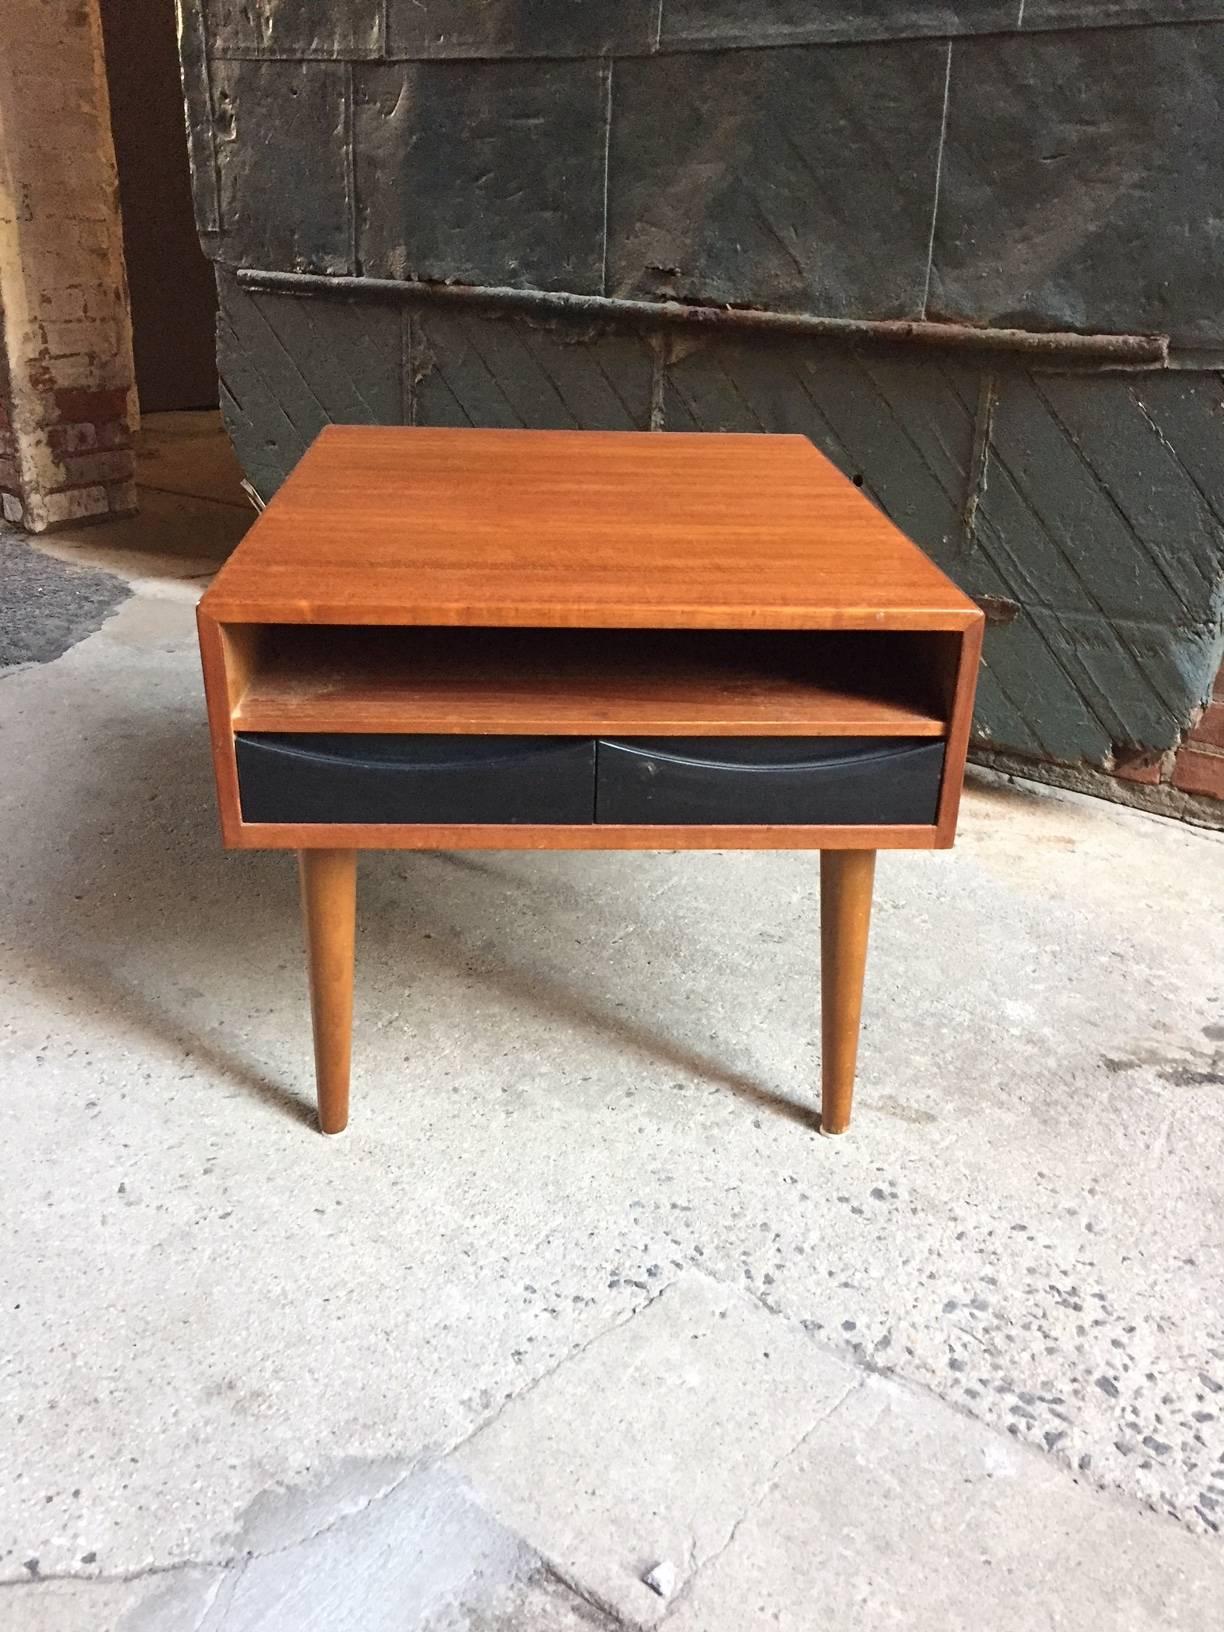 Slender two-drawer teak end table. Unsigned. Two small black lacquered drawer fronts, circa 1960.

Good condition. The drawers are lined with foam.